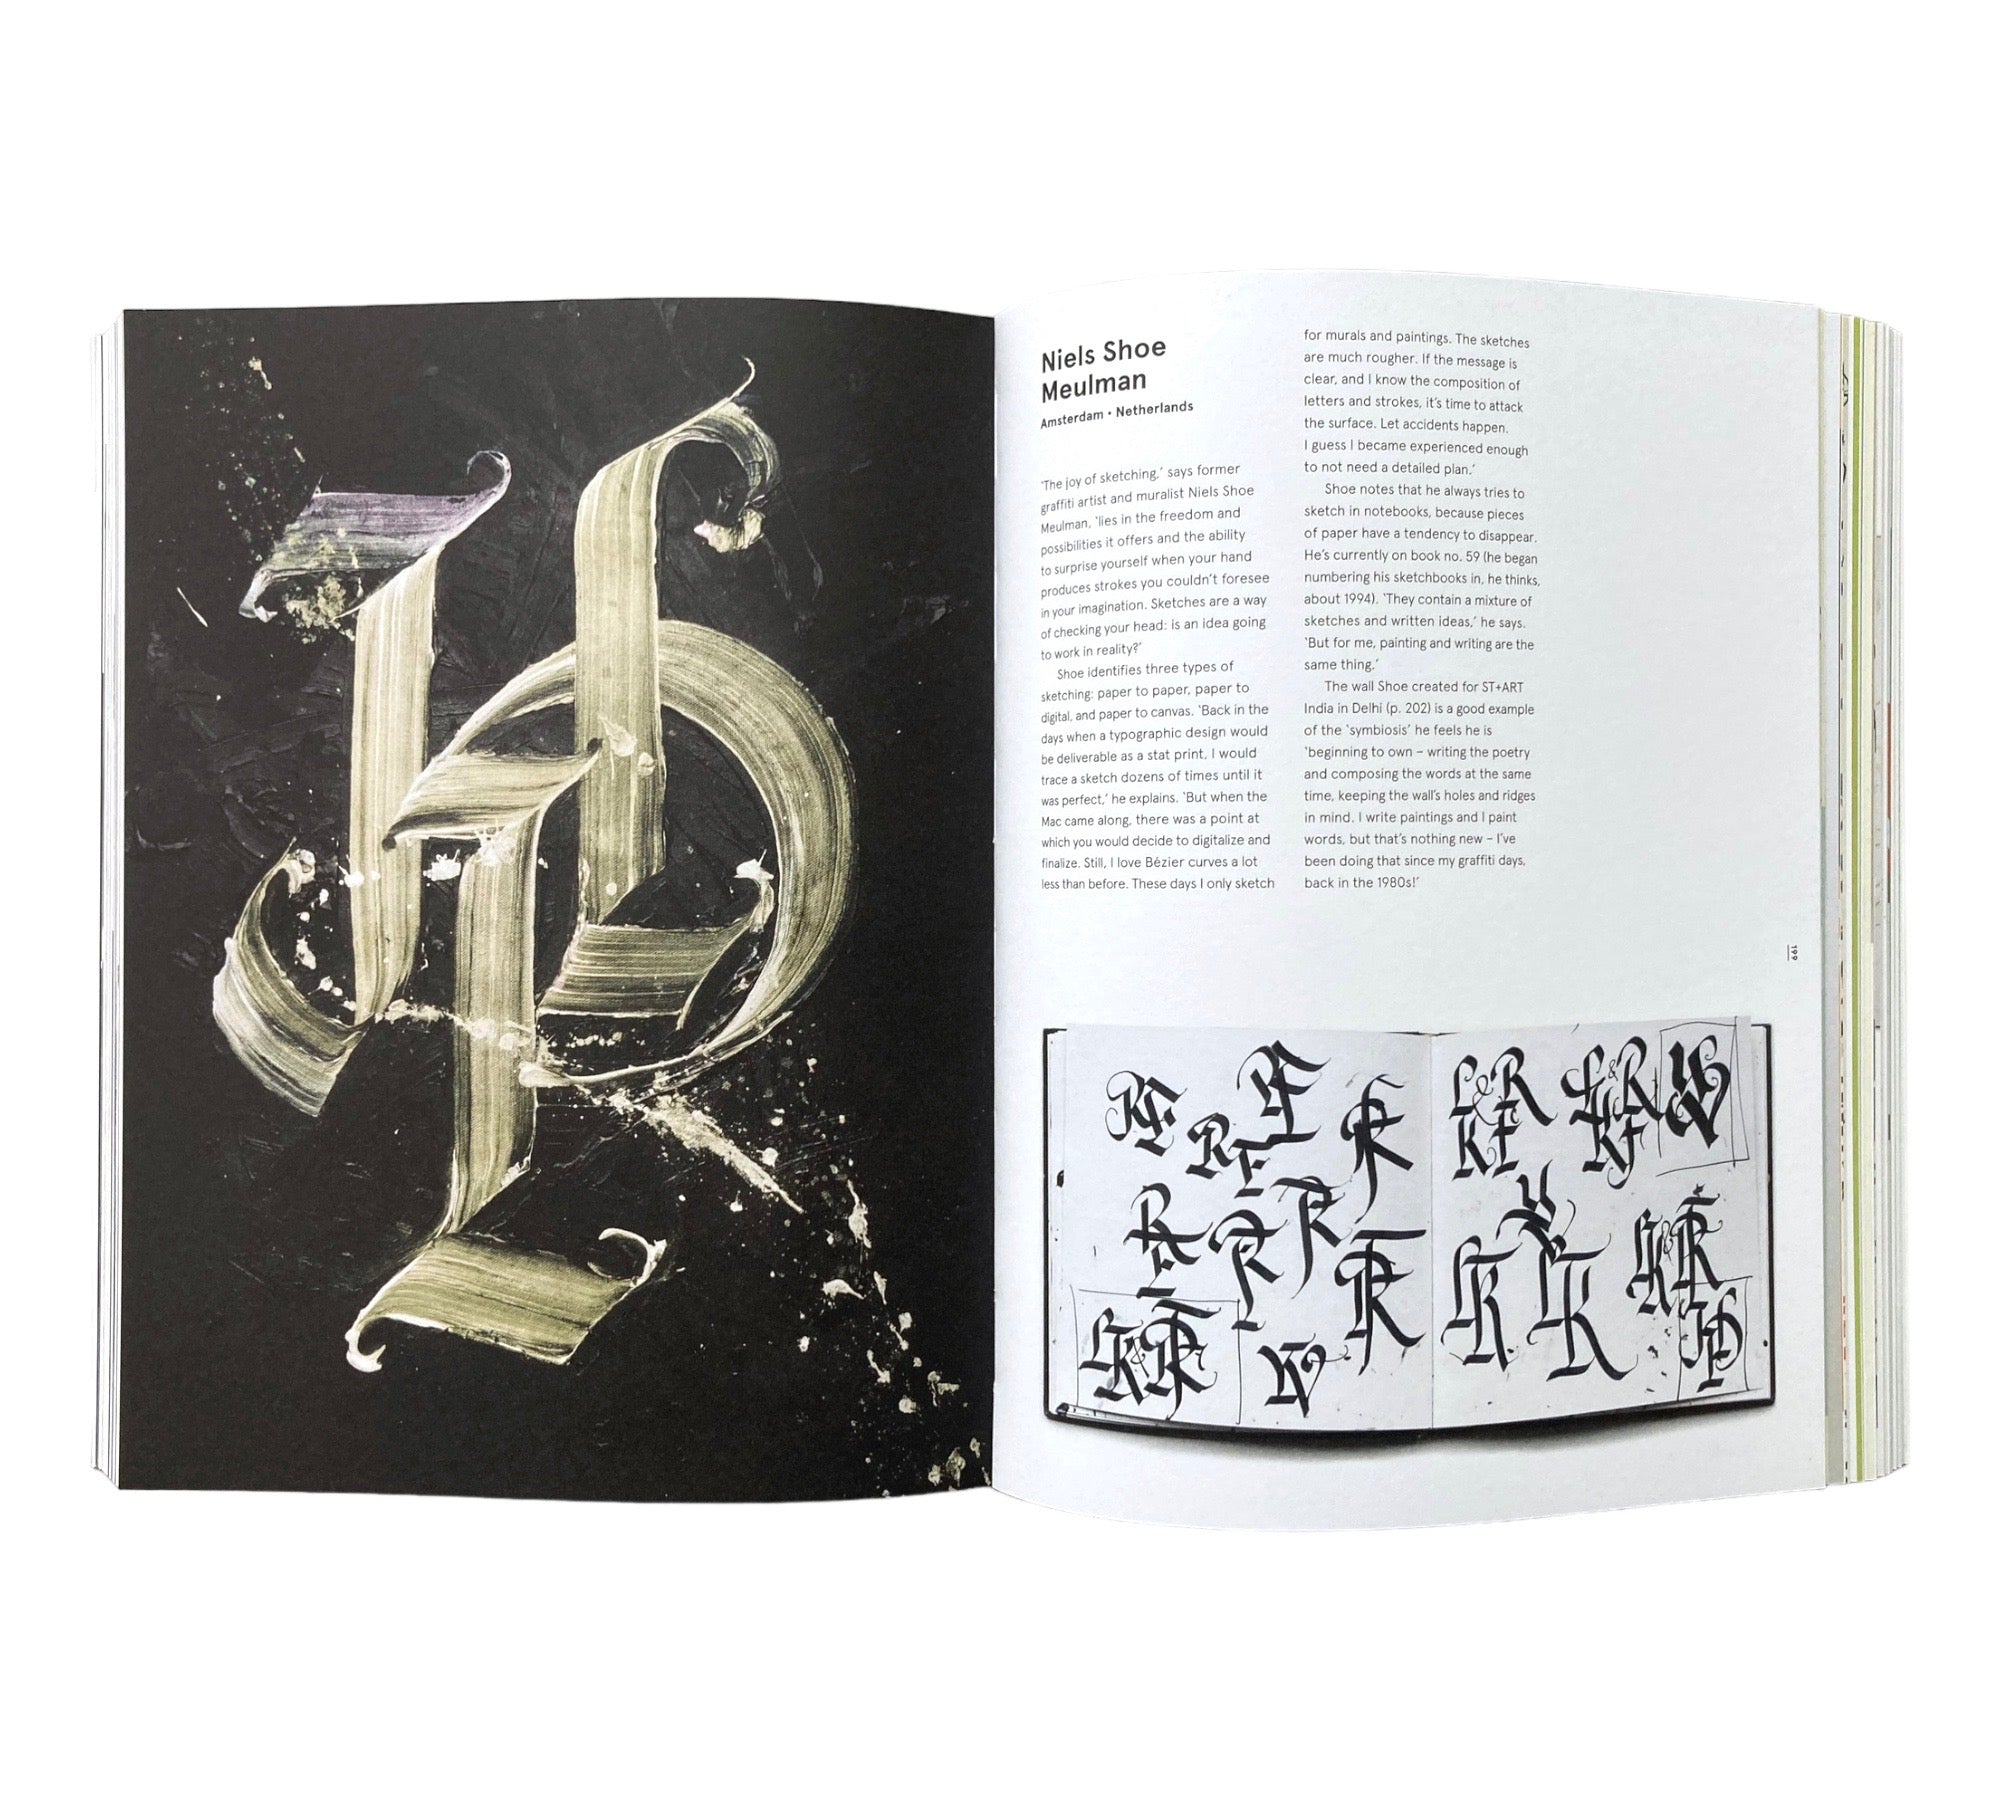 Free Hand: New Typography Sketchbooks